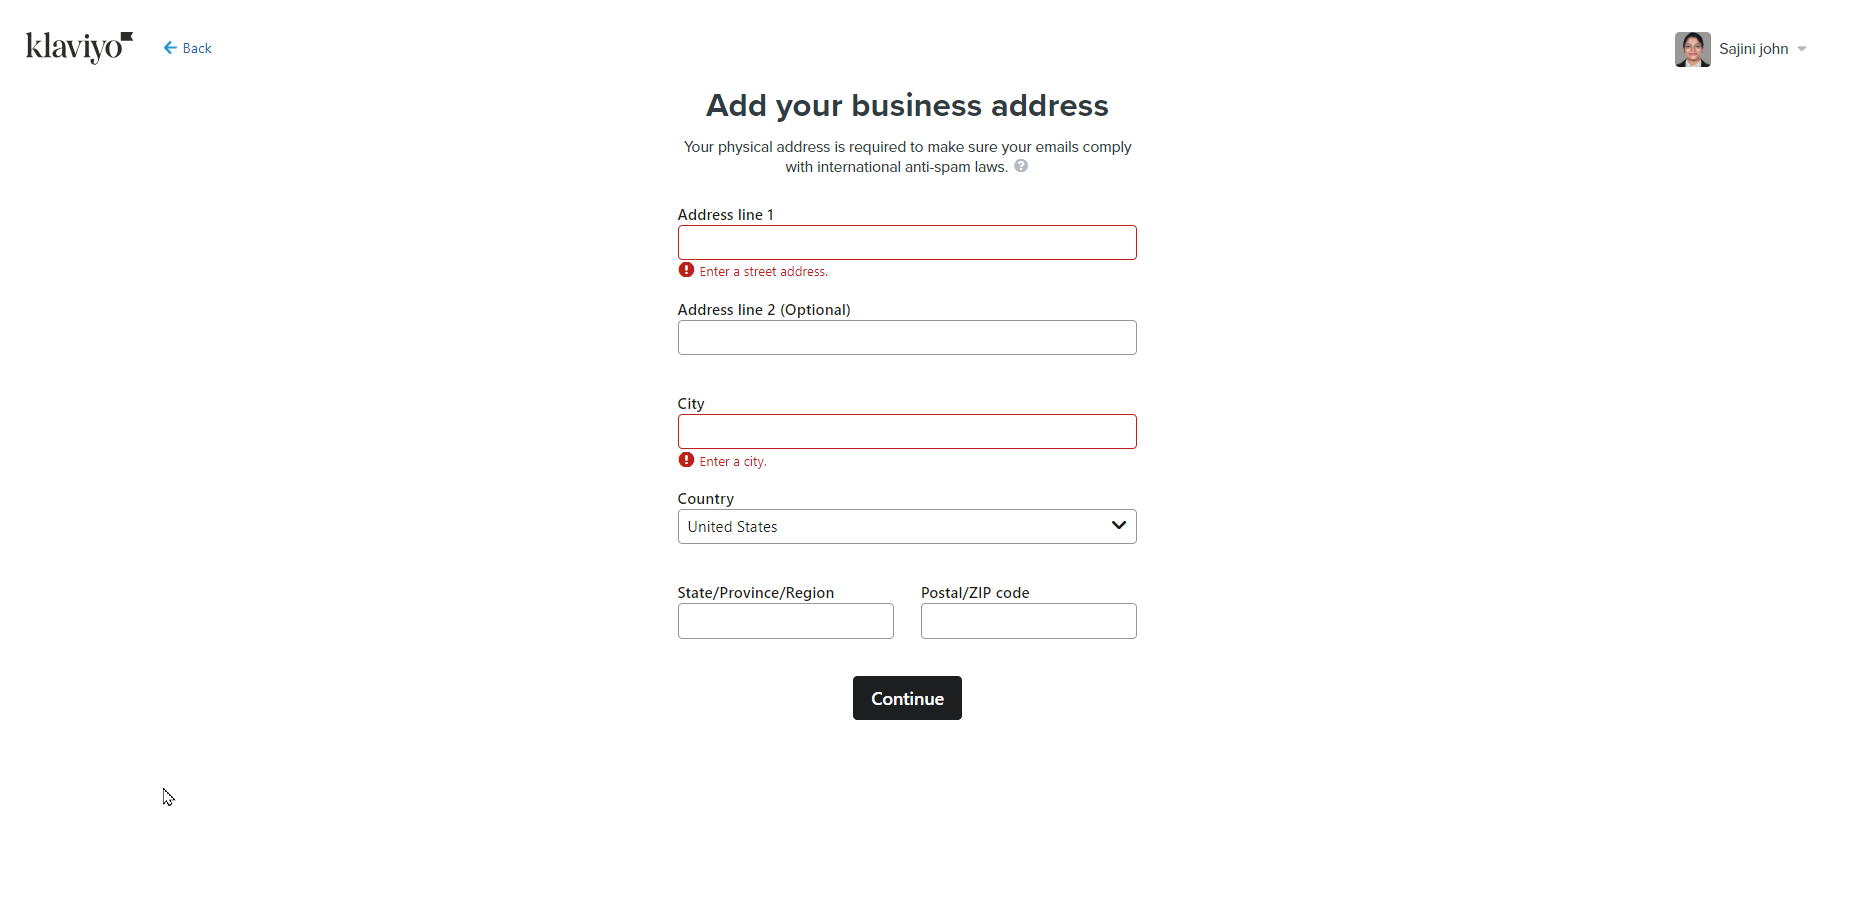 add-your-business-address-details